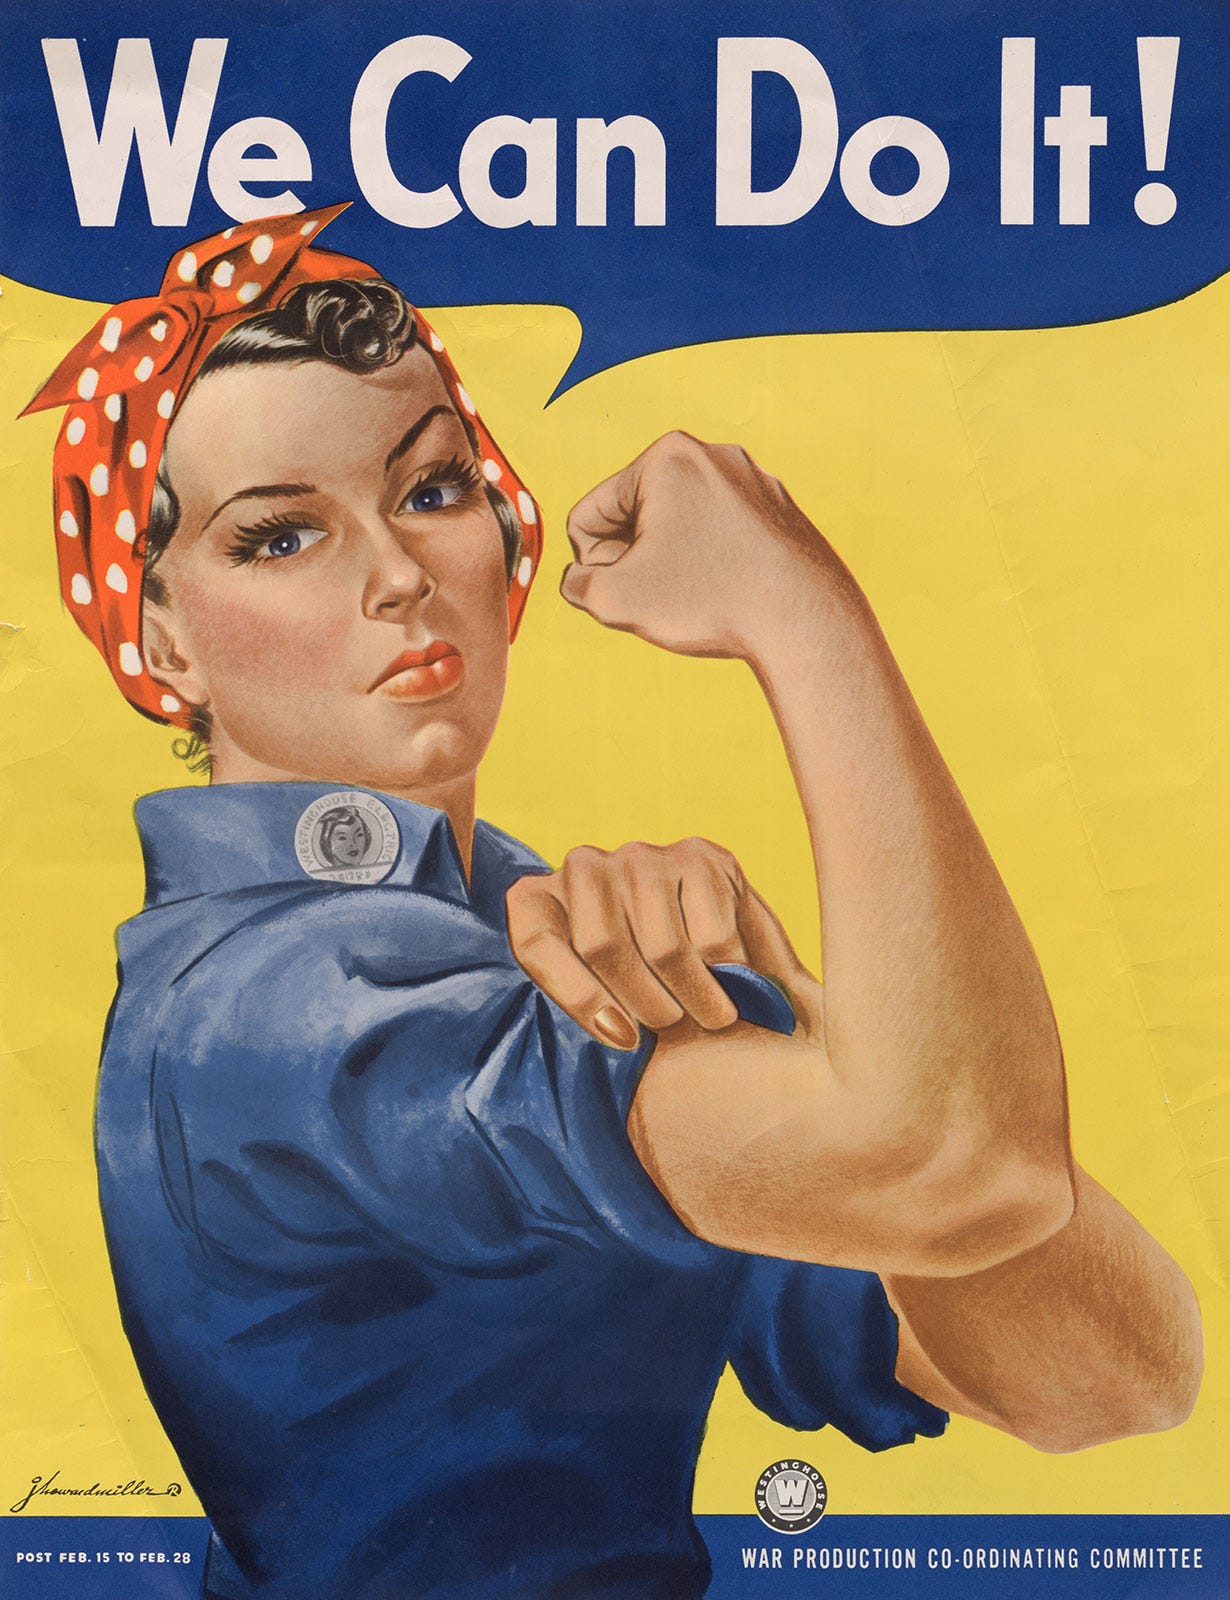 Rosie the Riveter | Definition, Poster, & Facts | Britannica